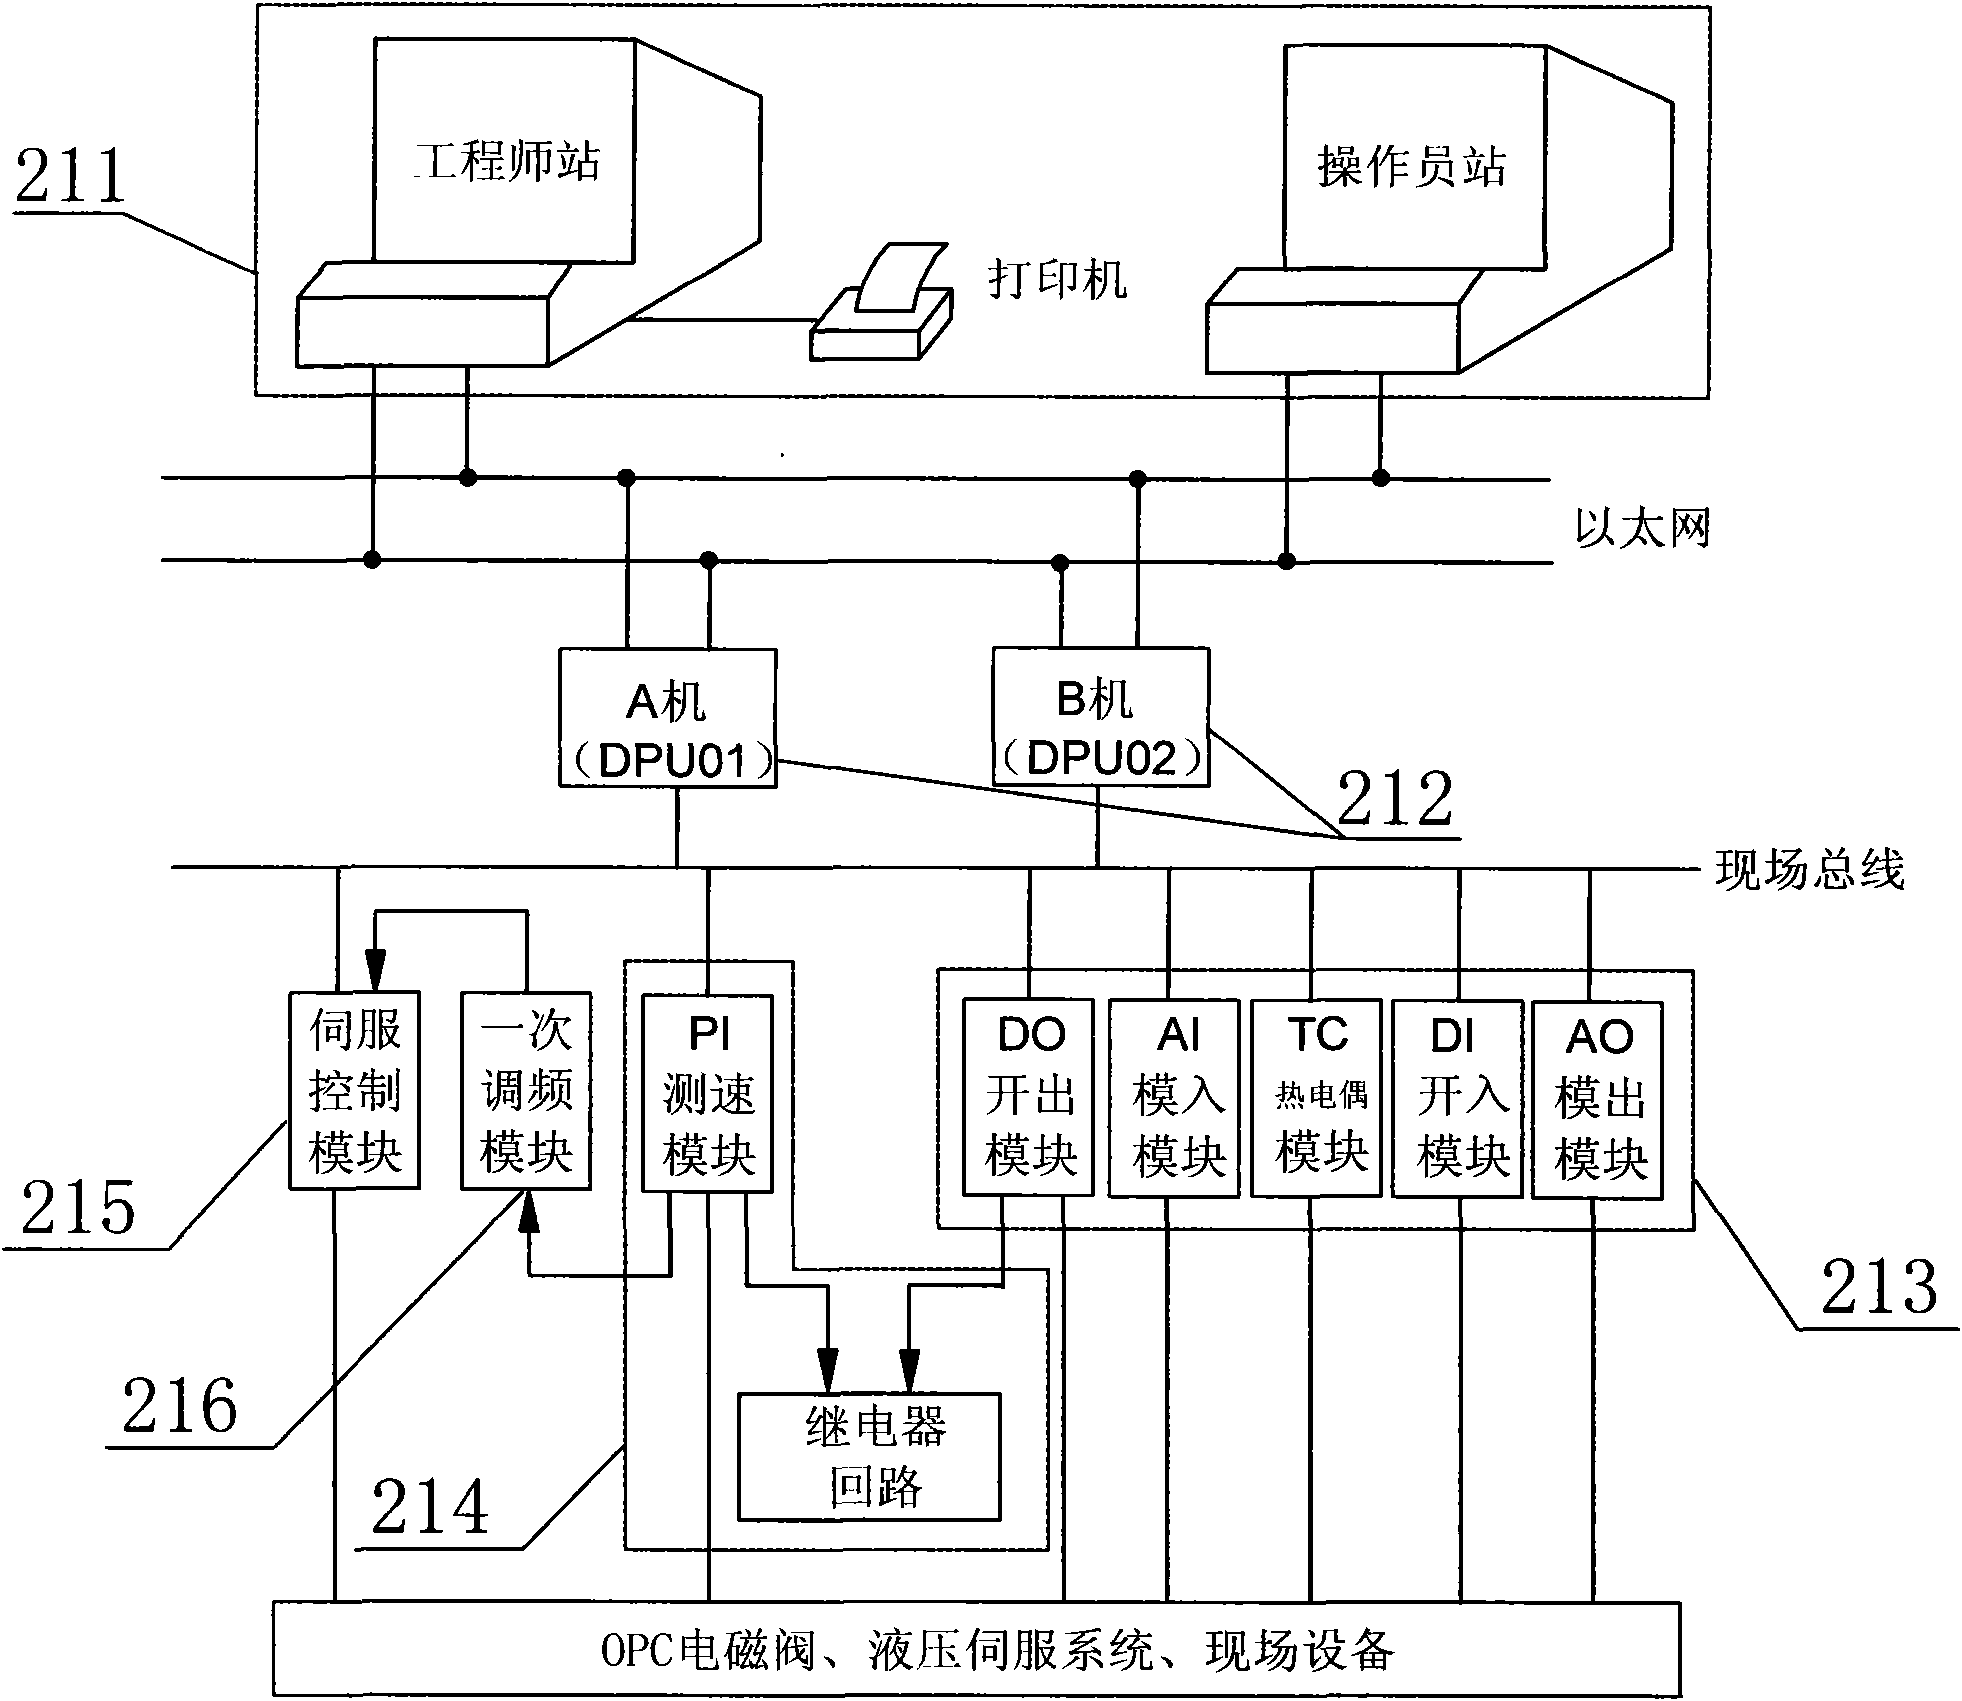 Digital electrohydraulic control system of steam turbine with isolated network operation